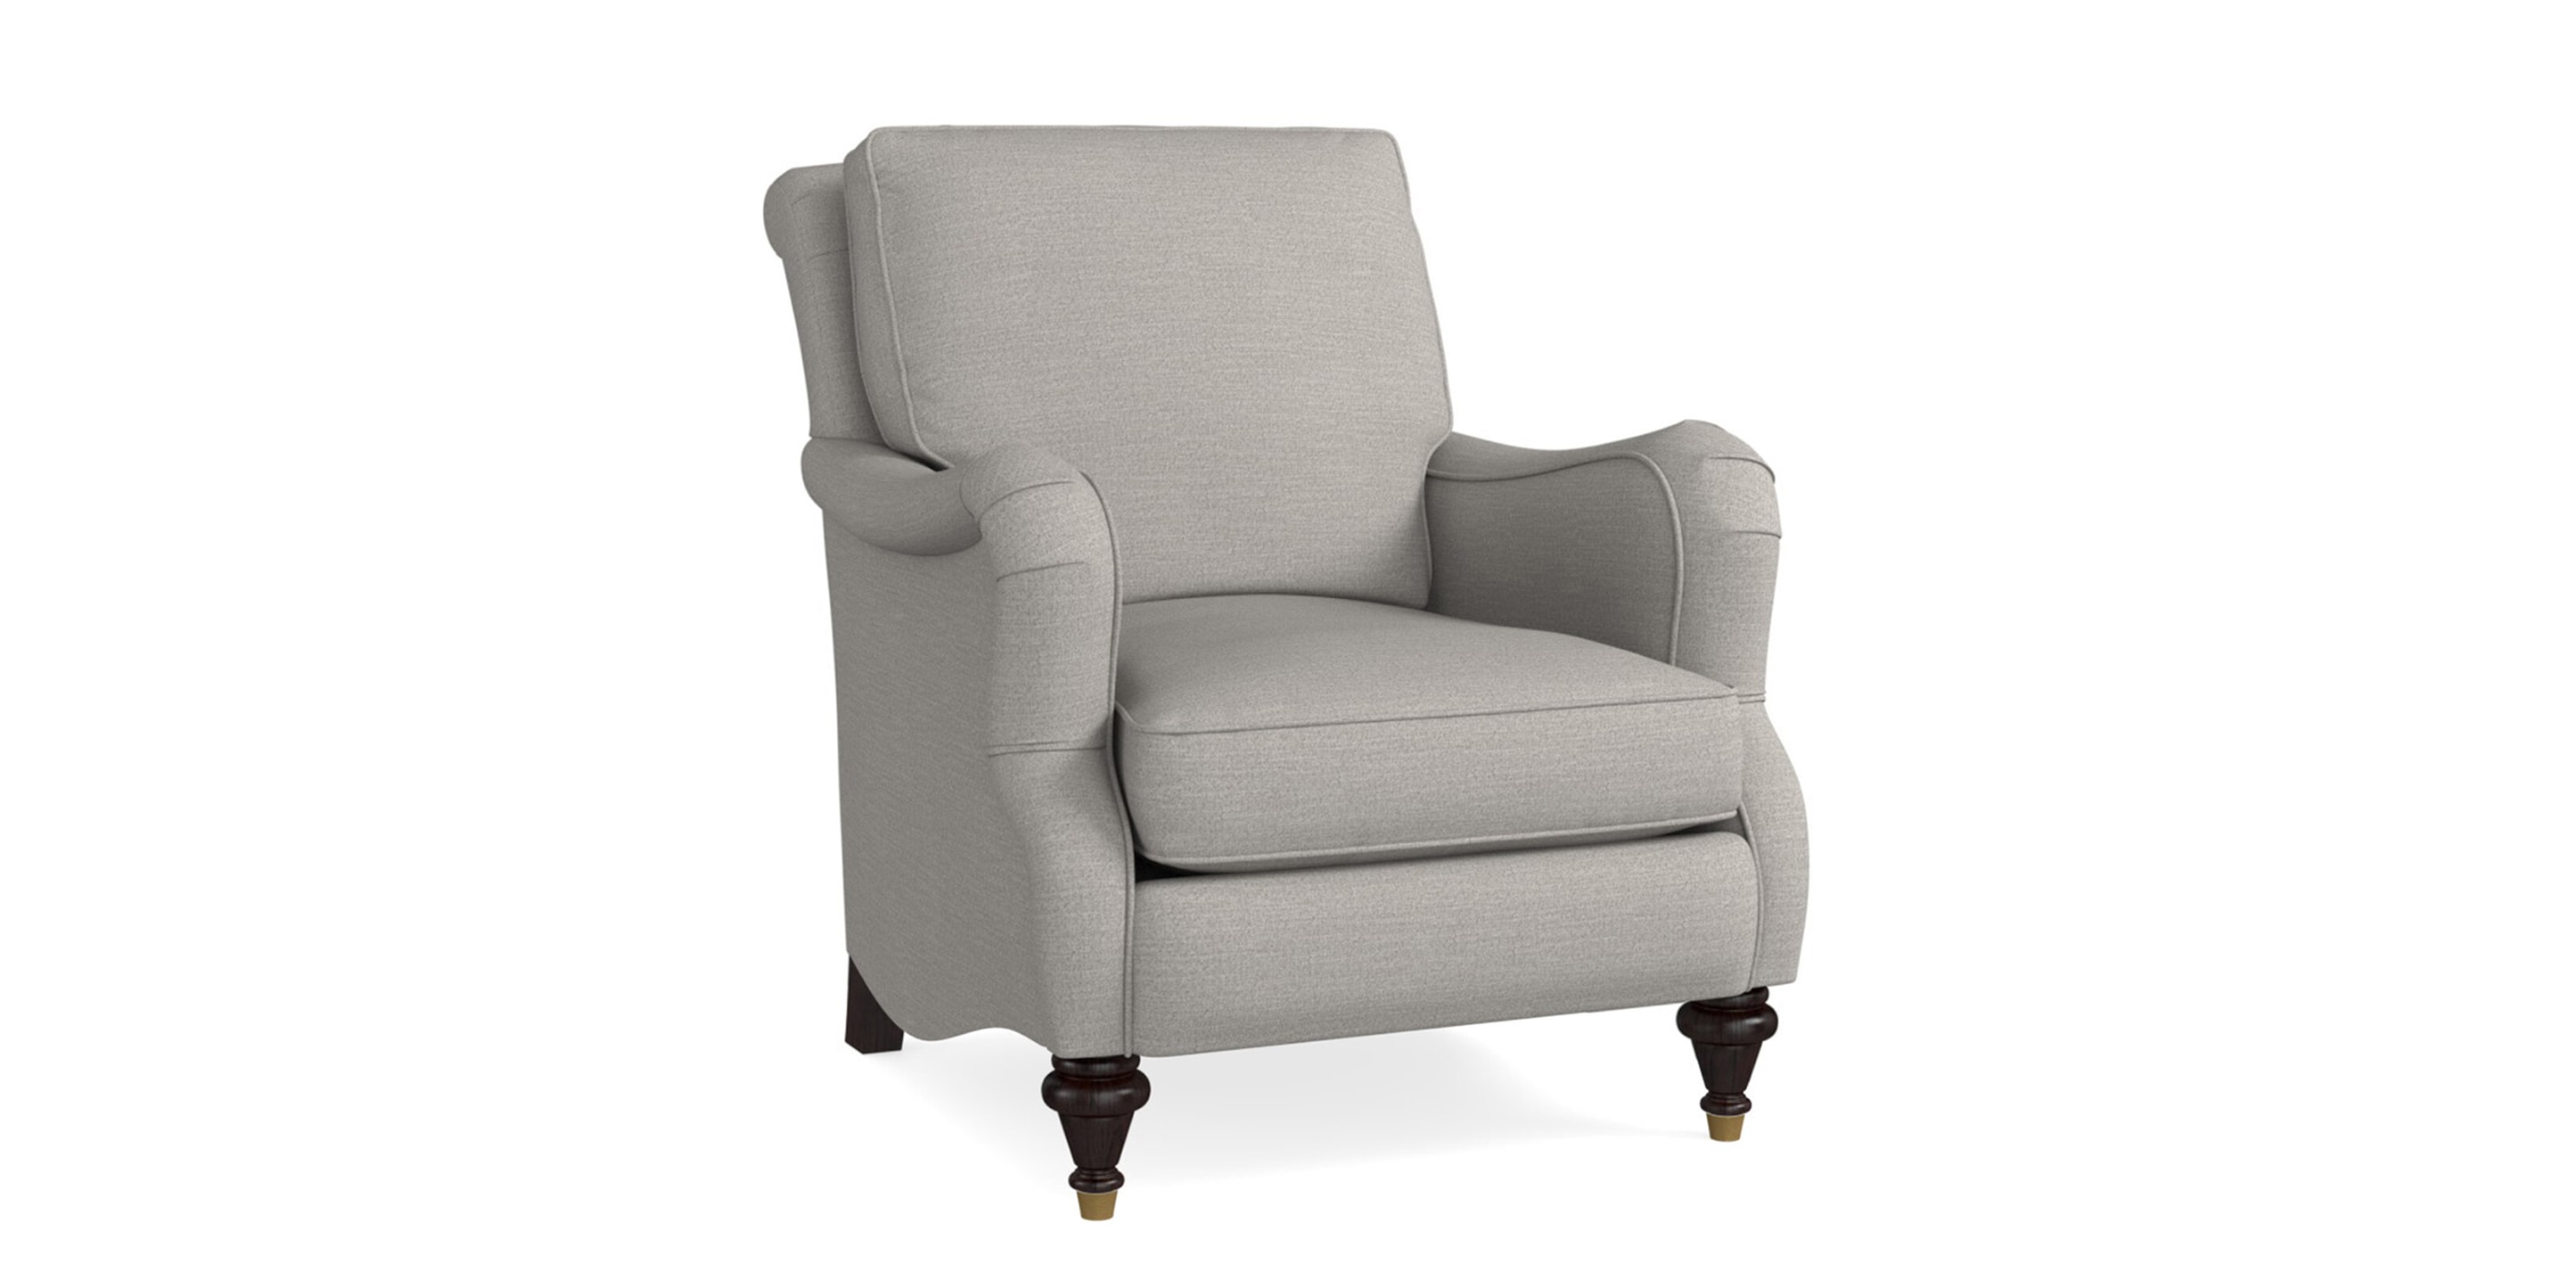 Oxford Charles of London Arm Chair